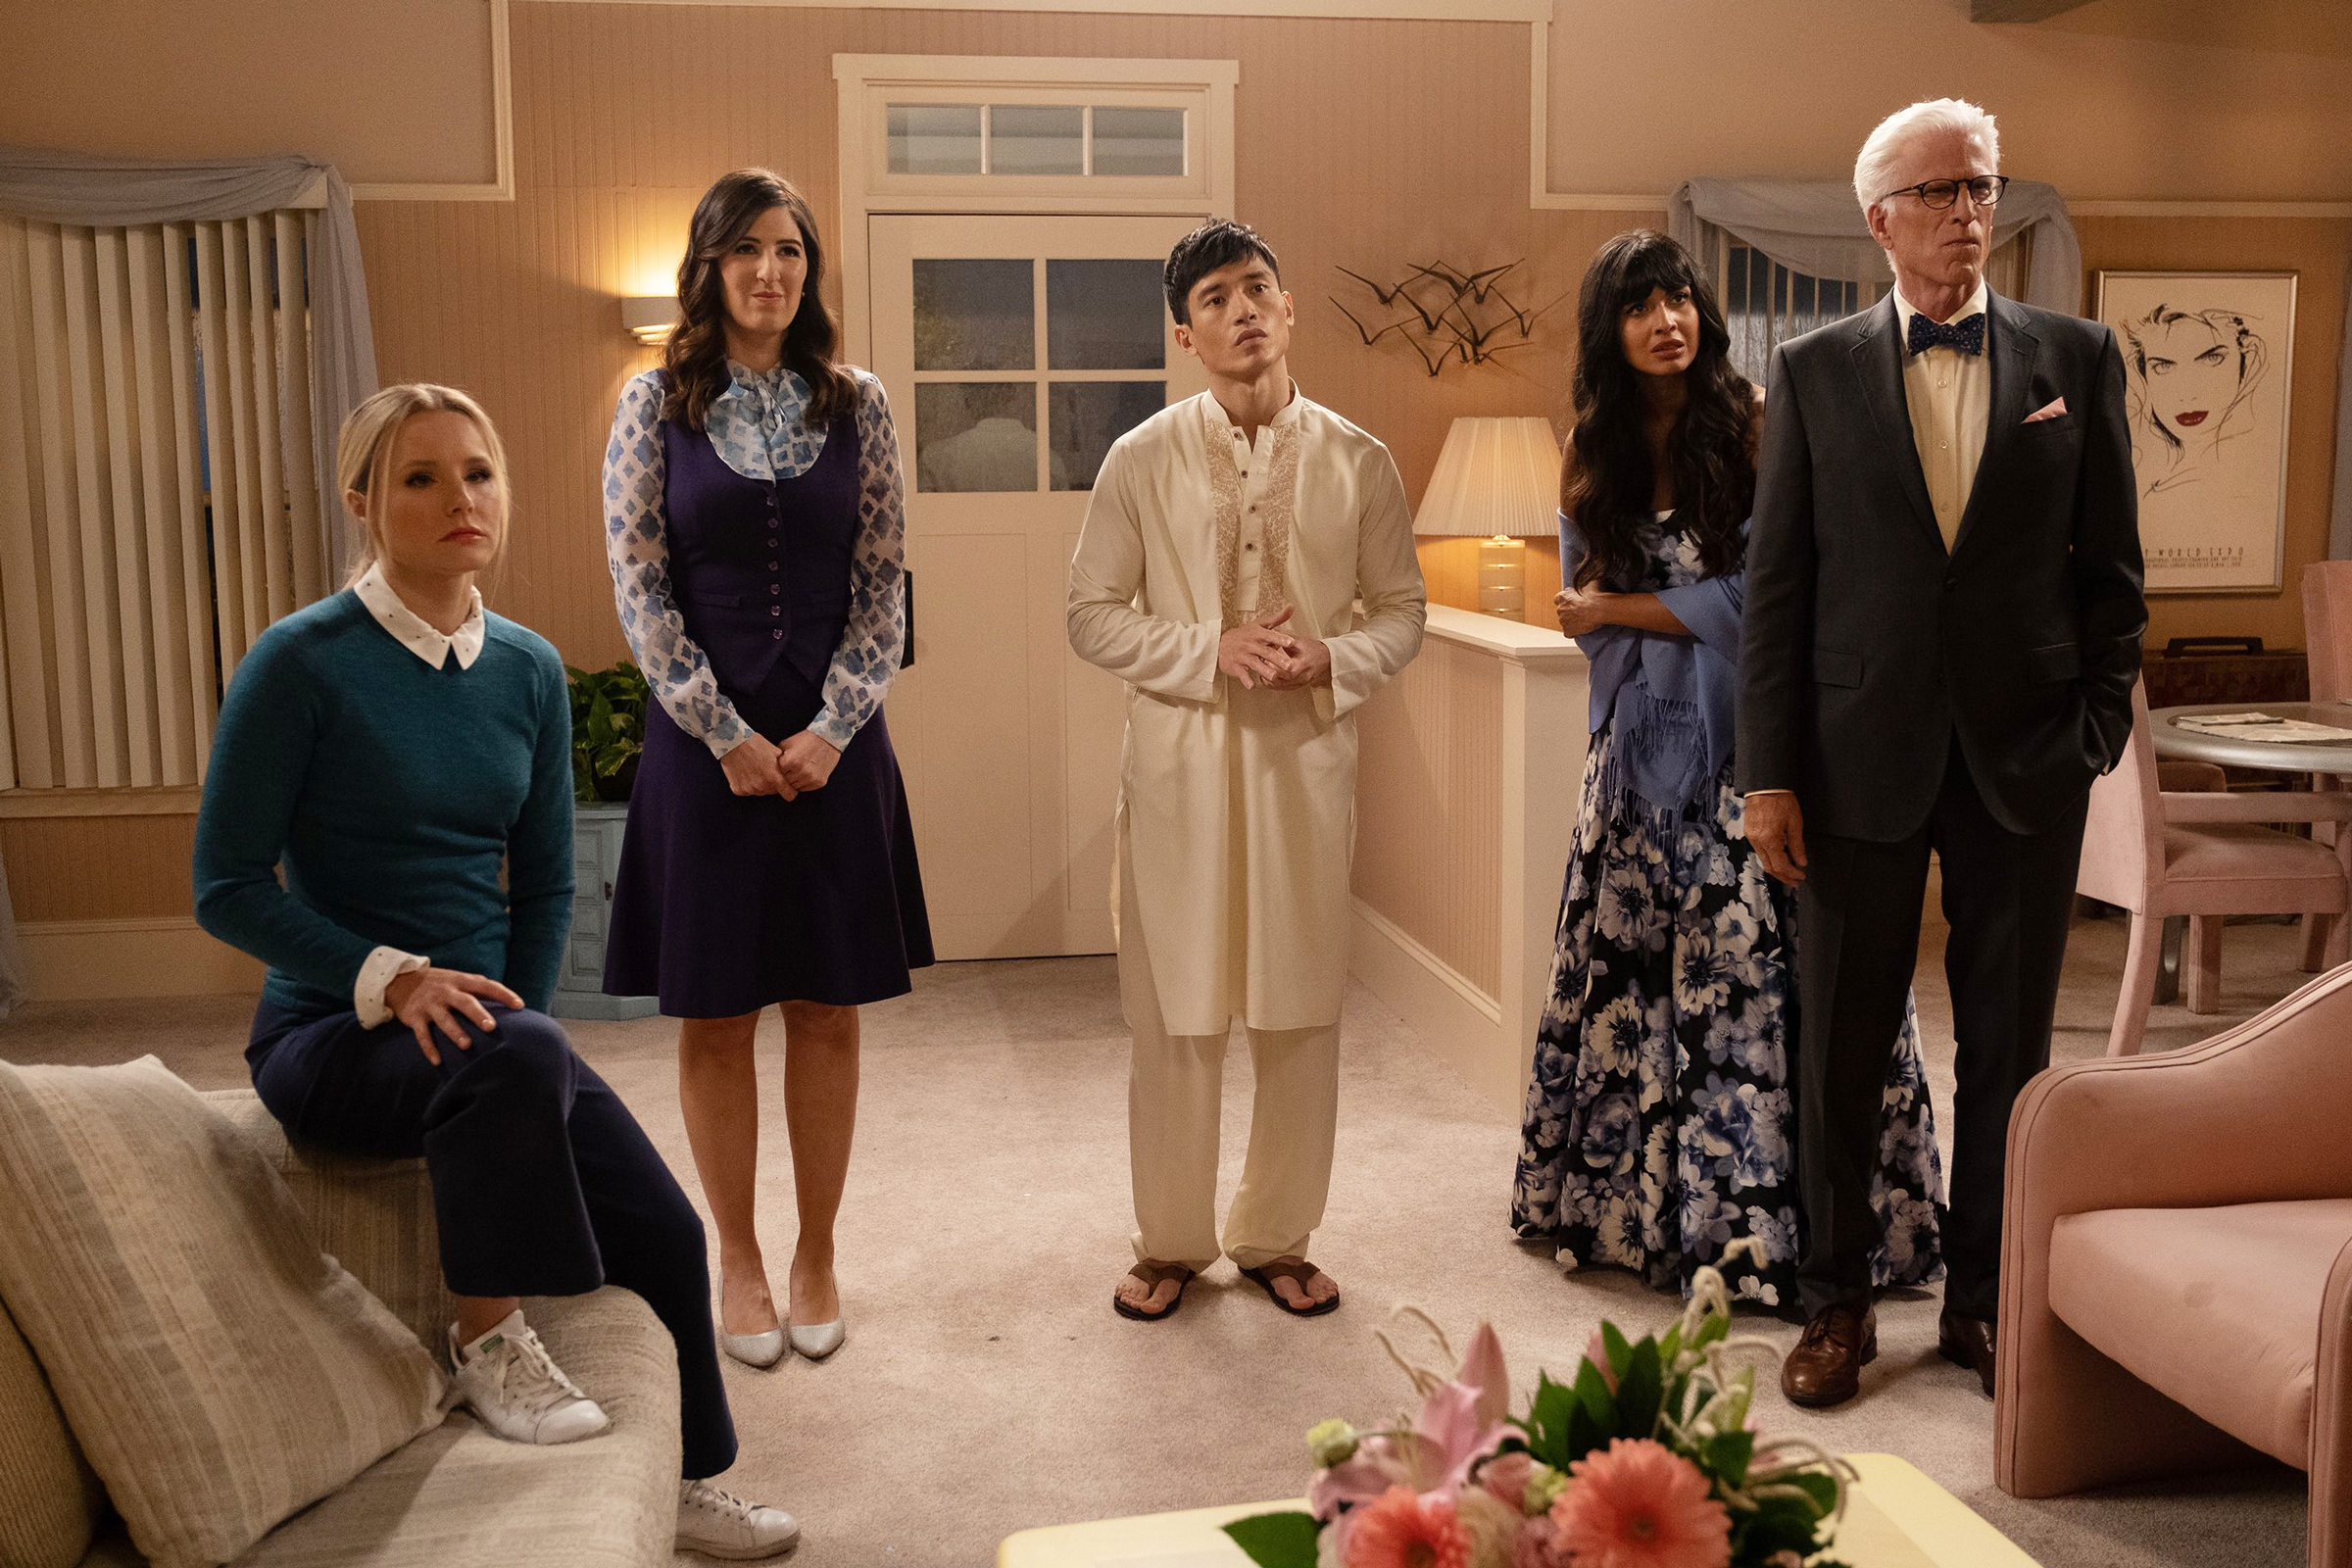 The Good Place Season 4 Episode 10 Release Date When Does The